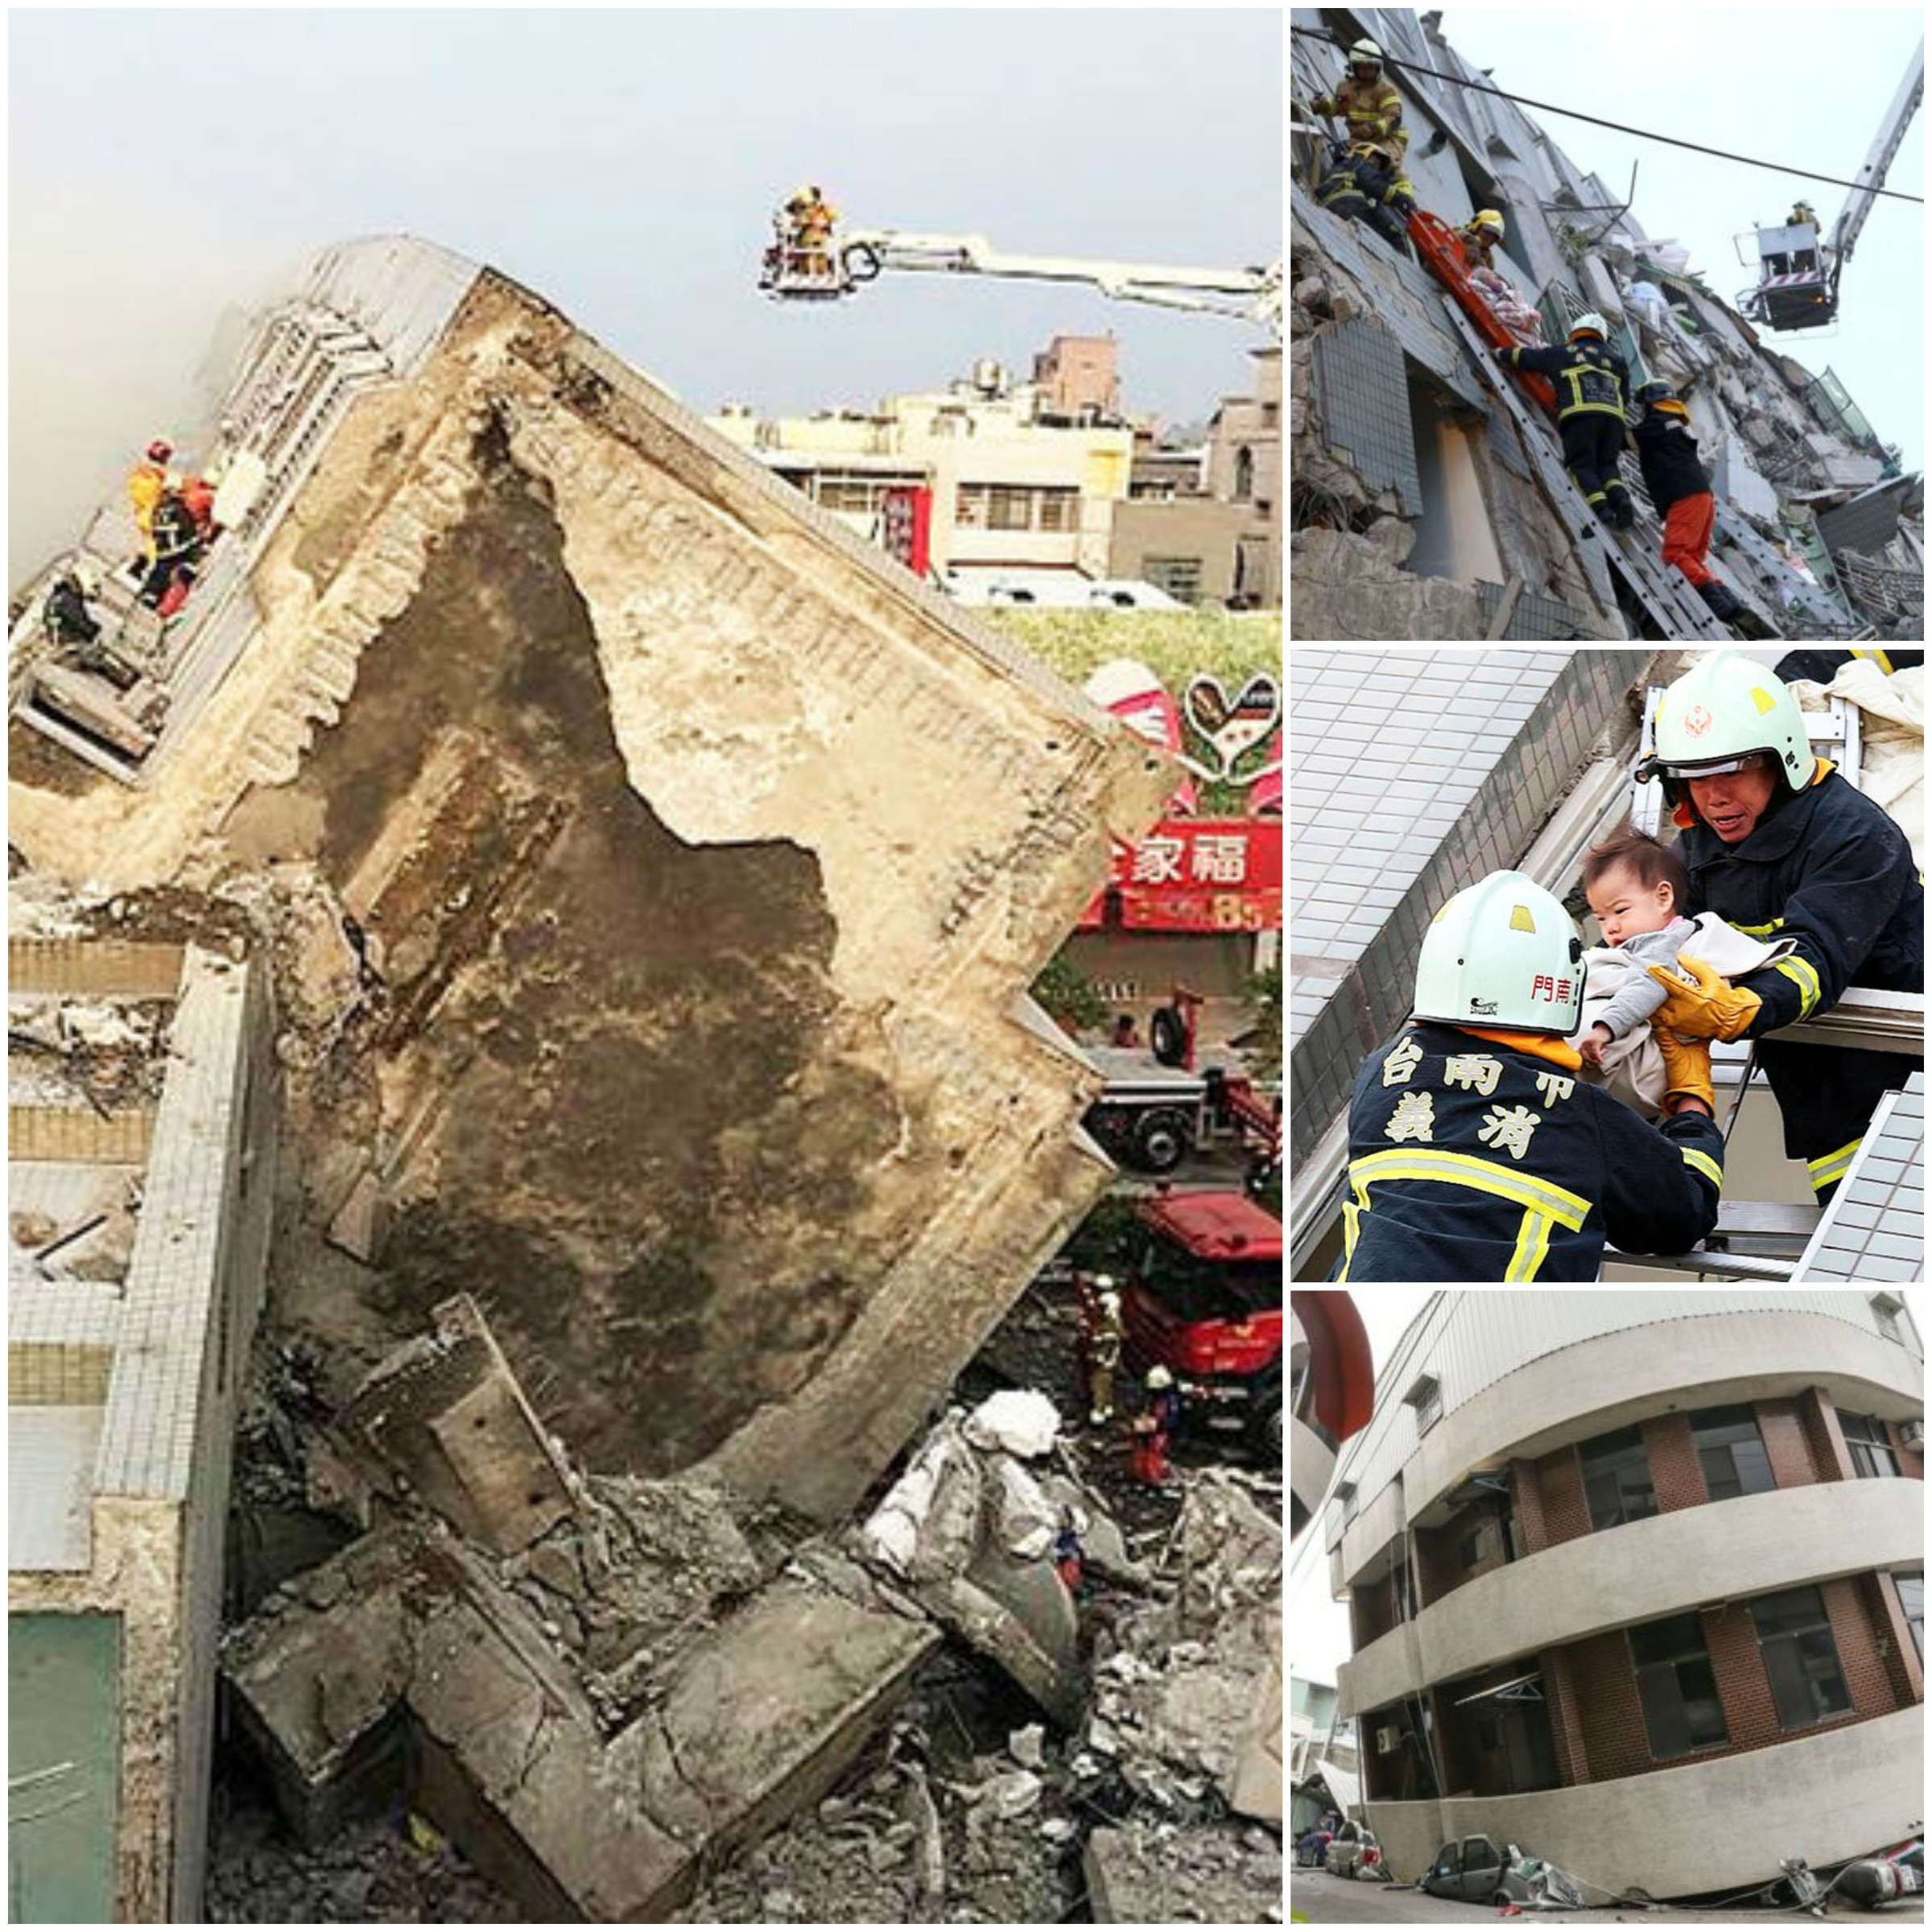 Three dead as buildings collapse after 'enormous' 6.4 magnitude Taiwan earthquake